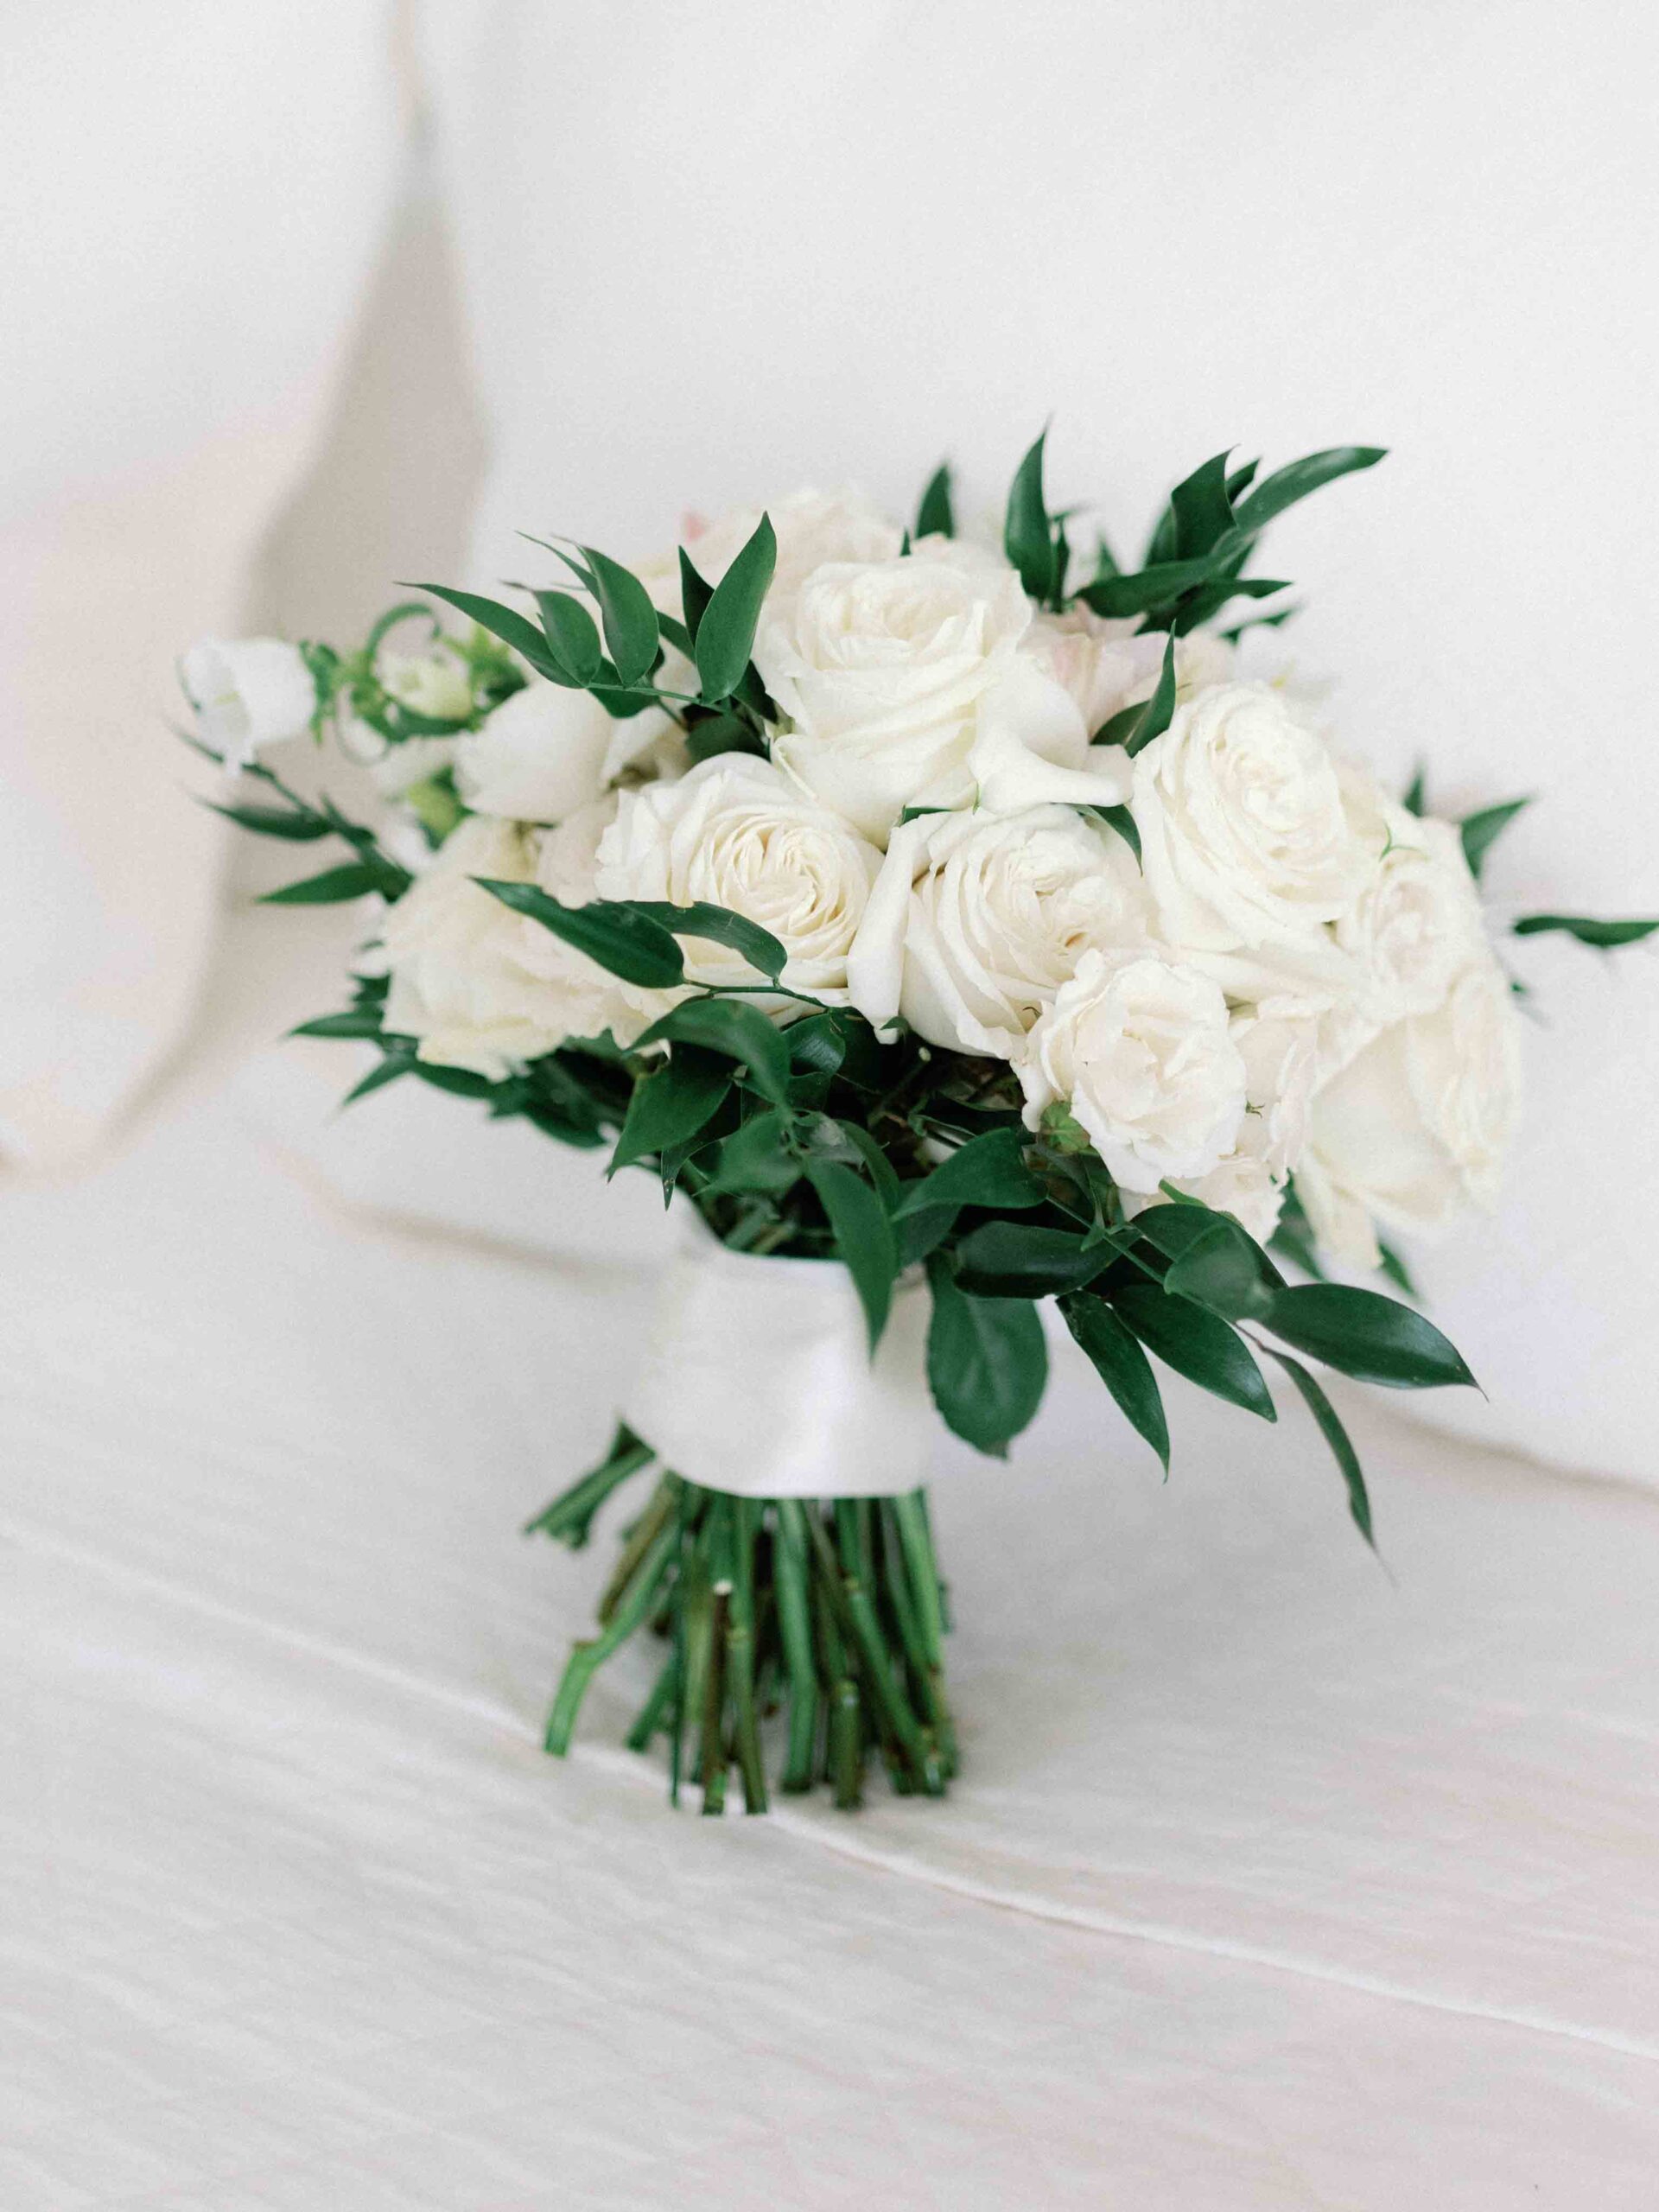 White rose wedding bouqet by Florals by Kait on a bed